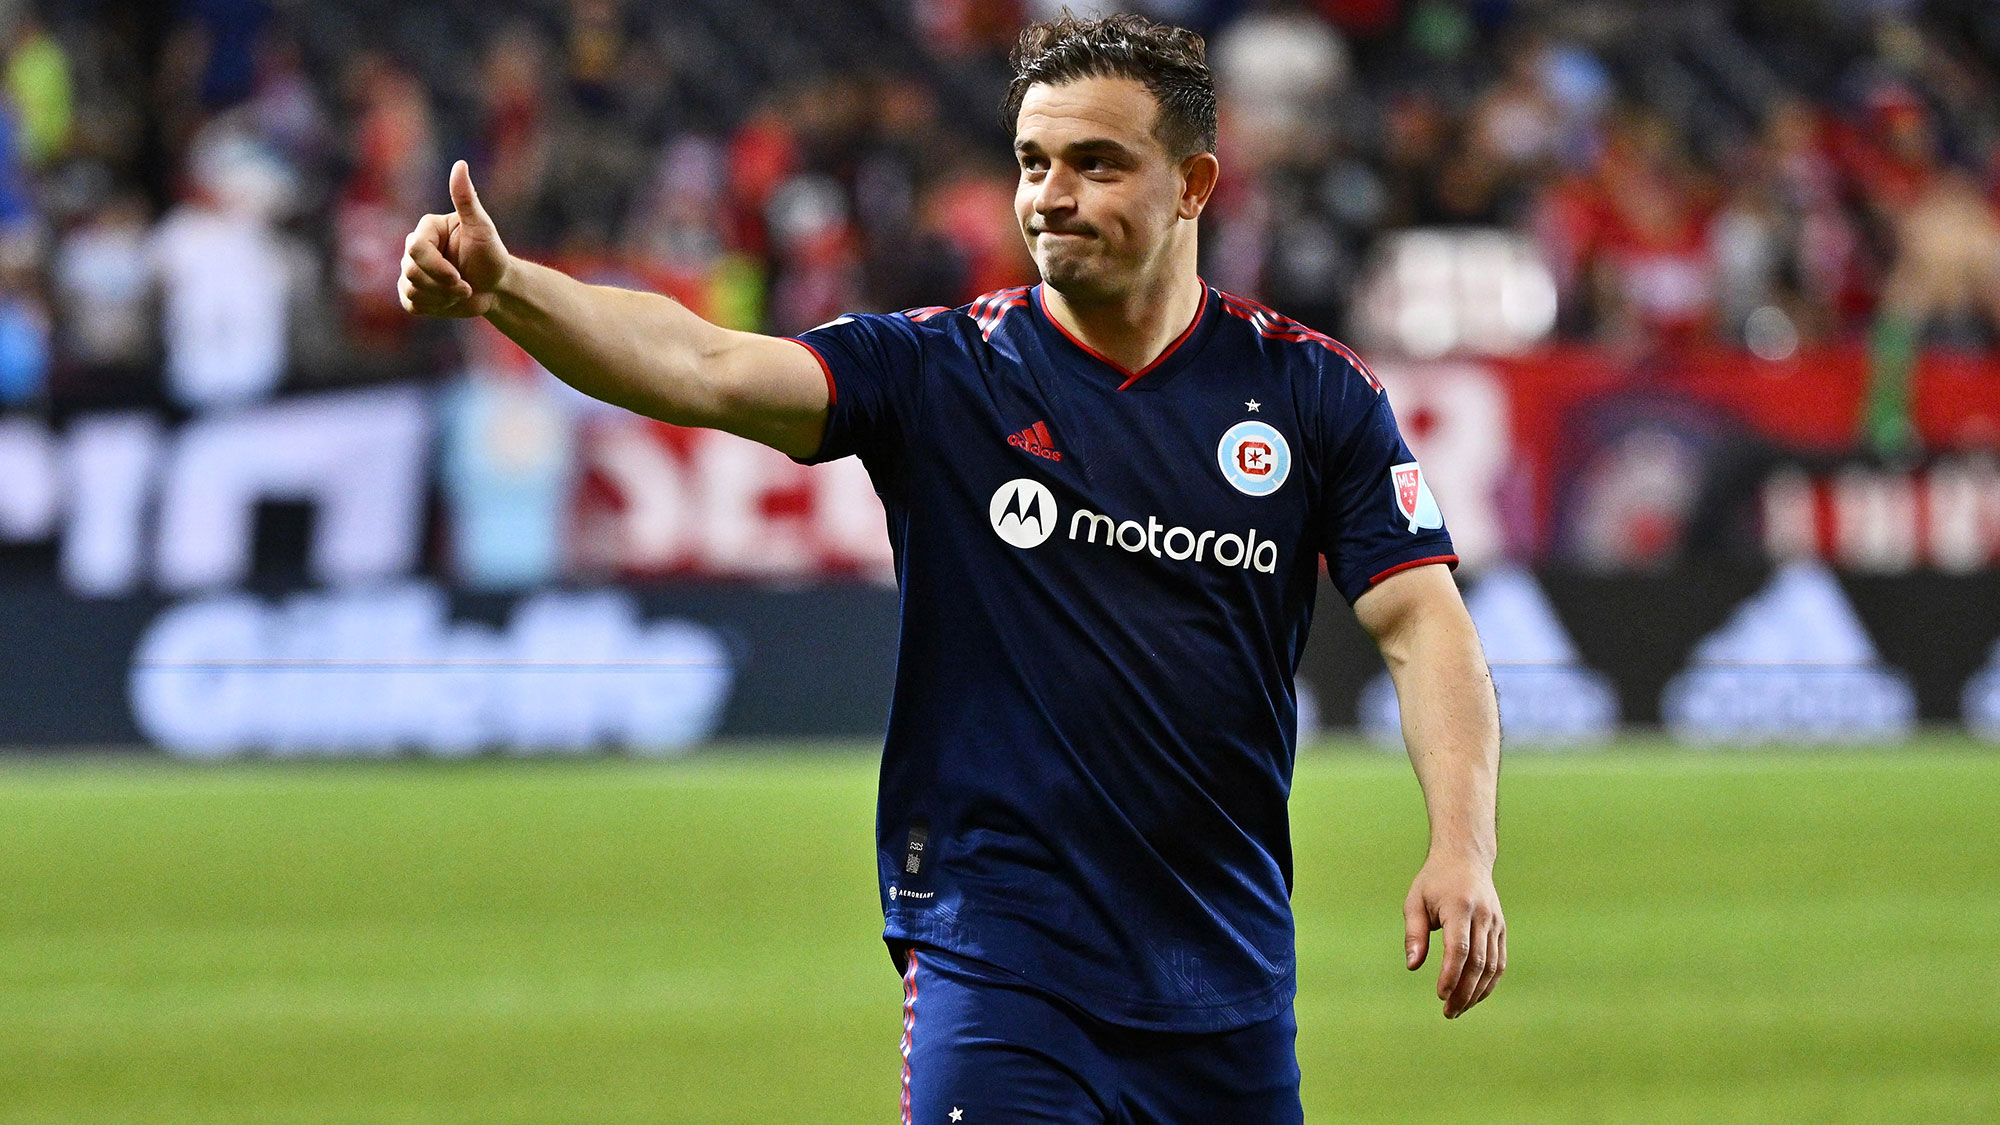 Chicago’s Shaqiri Becomes MLS’s Highest-Paid Player